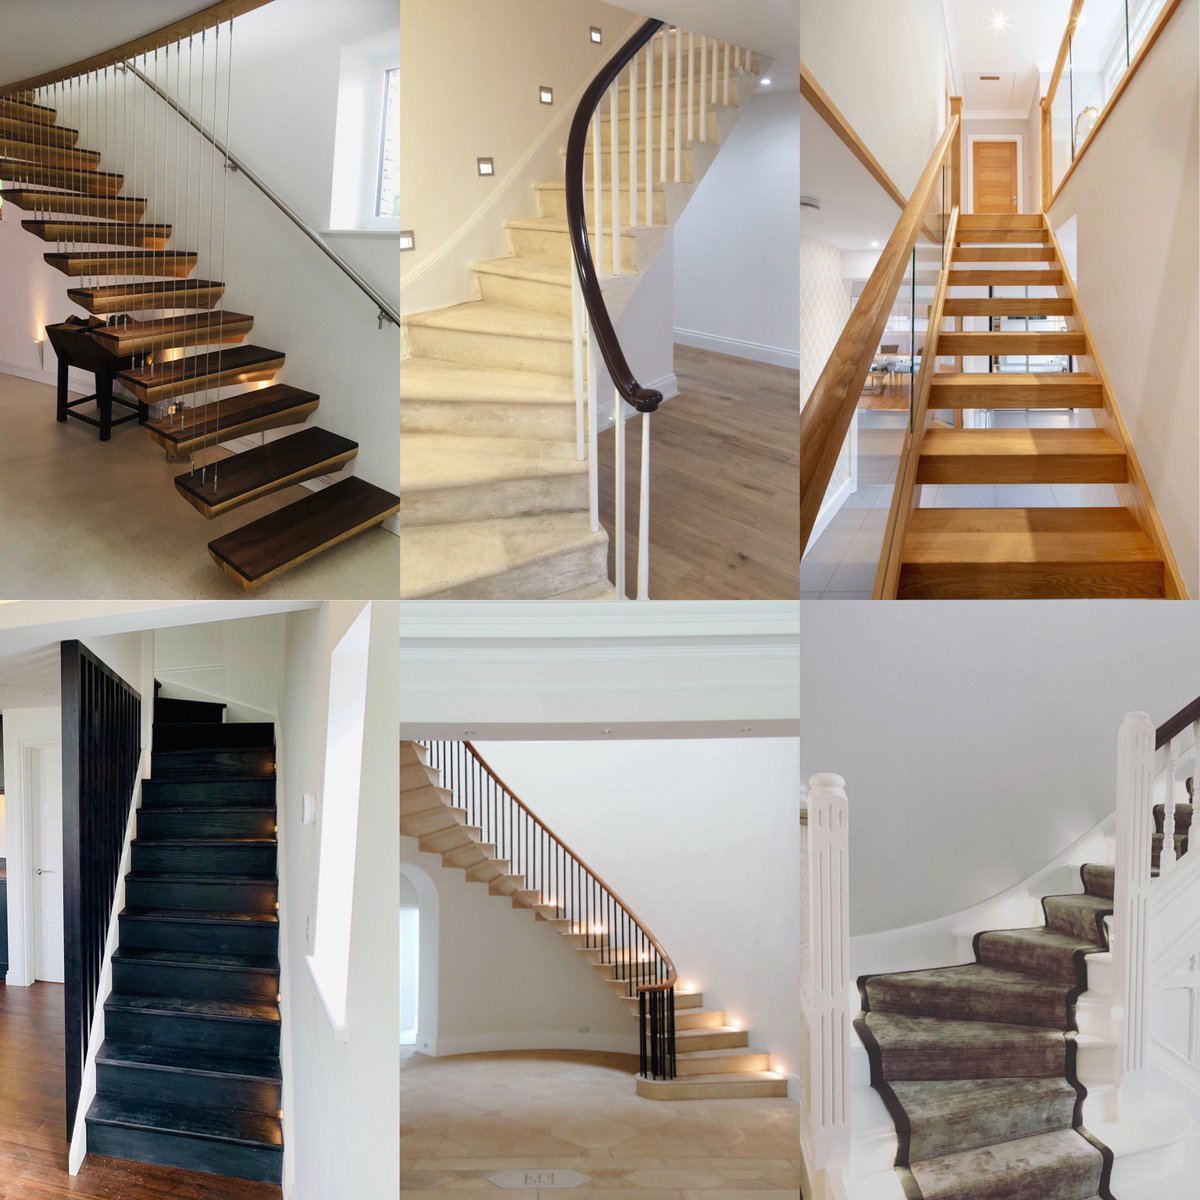 A few our past staircase installs 👌#stairporn #joinery #onwardsandupwards